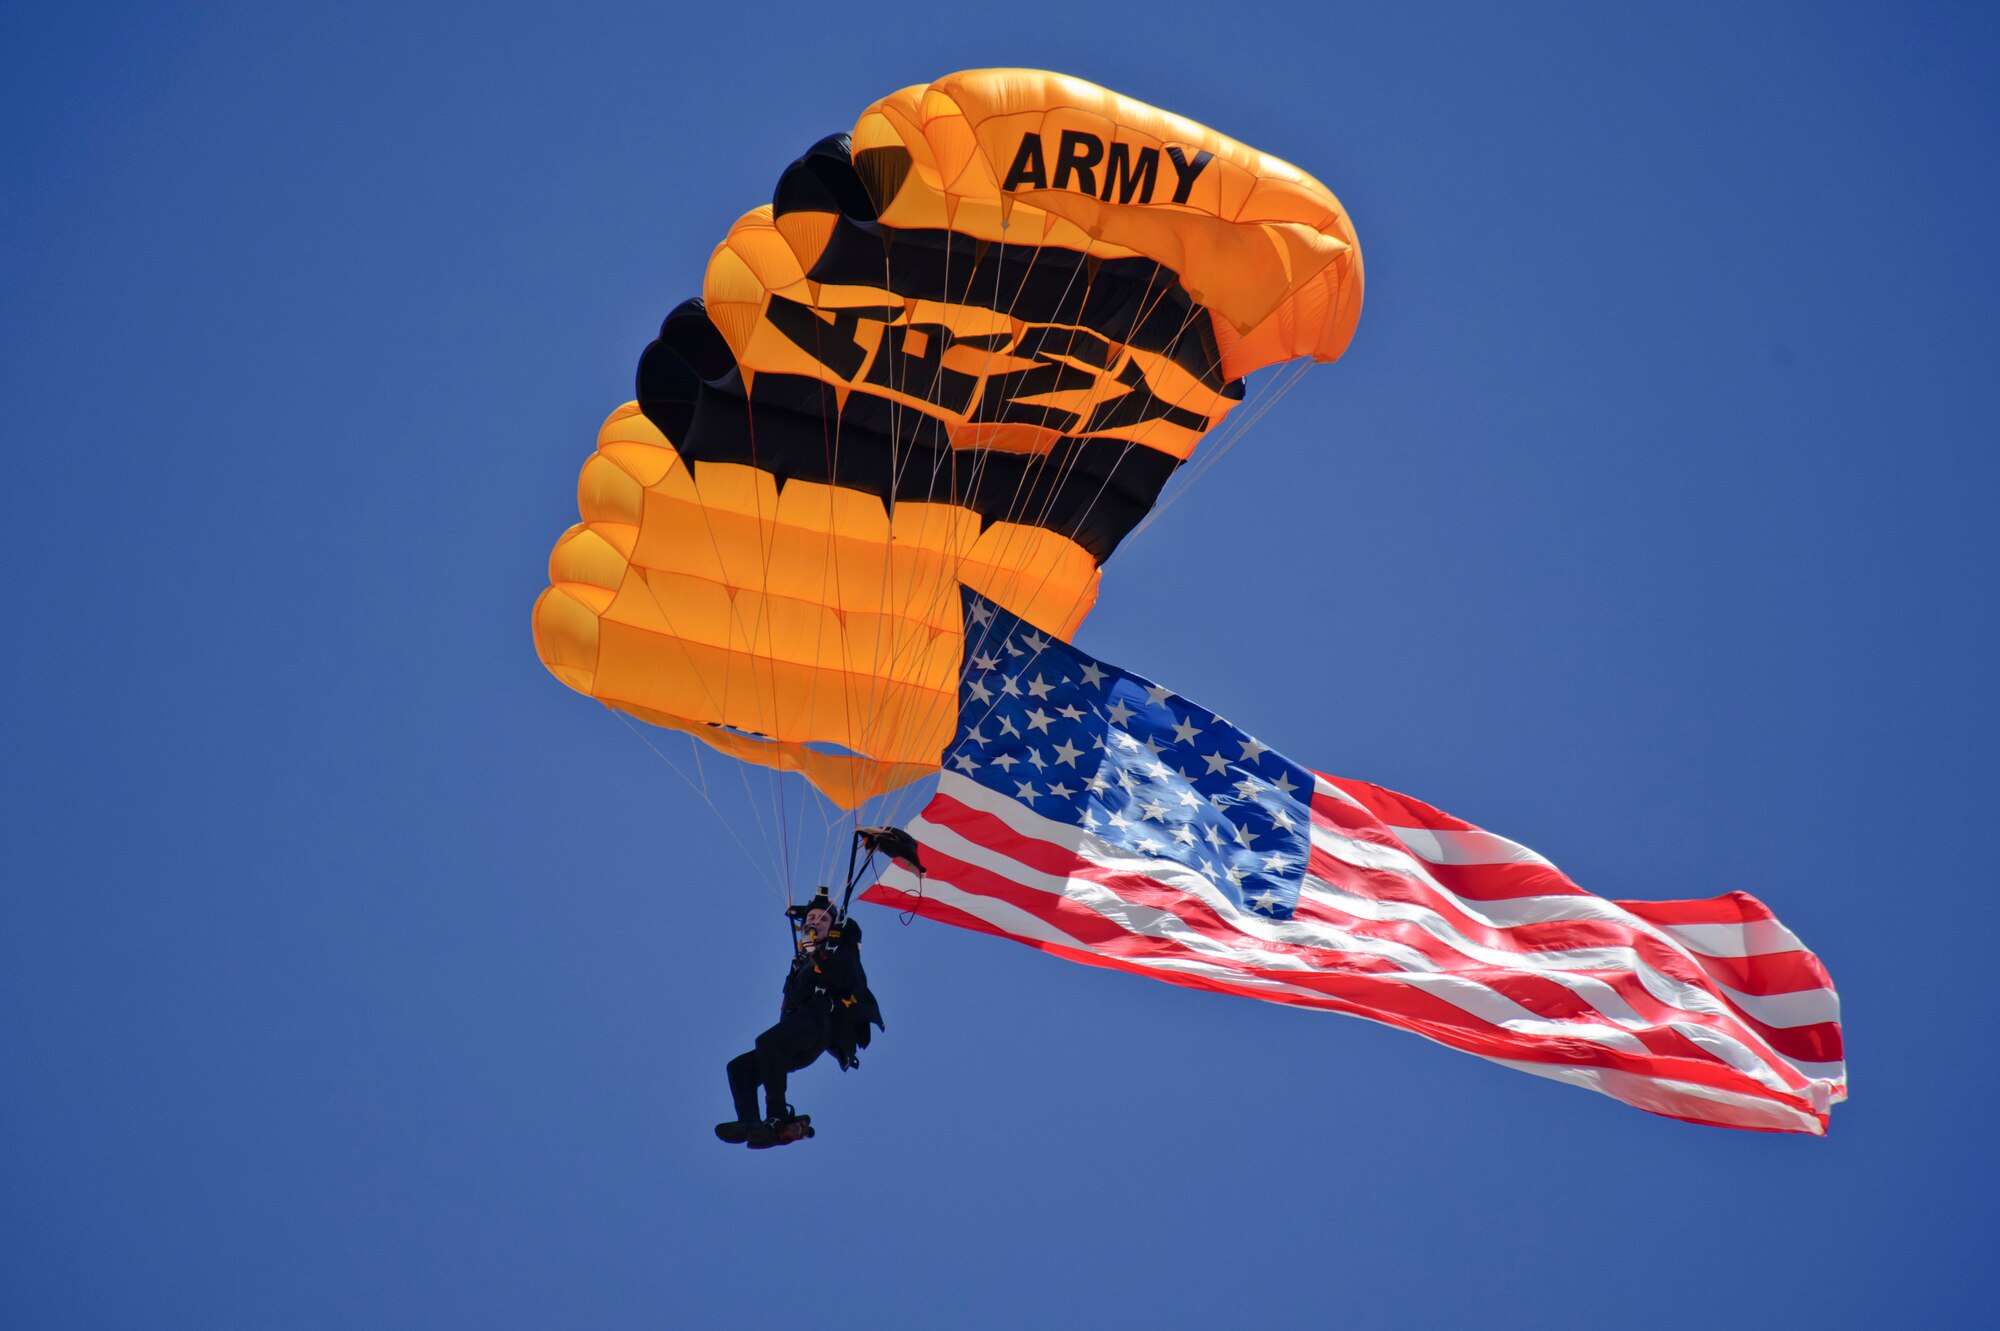 A U.S. Army parachutist with the Golden Knights parachute team approaches his landing July 13, 2019, at the “Mission Over Malmstrom” open house event on Malmstrom Air Force Base, Mont.